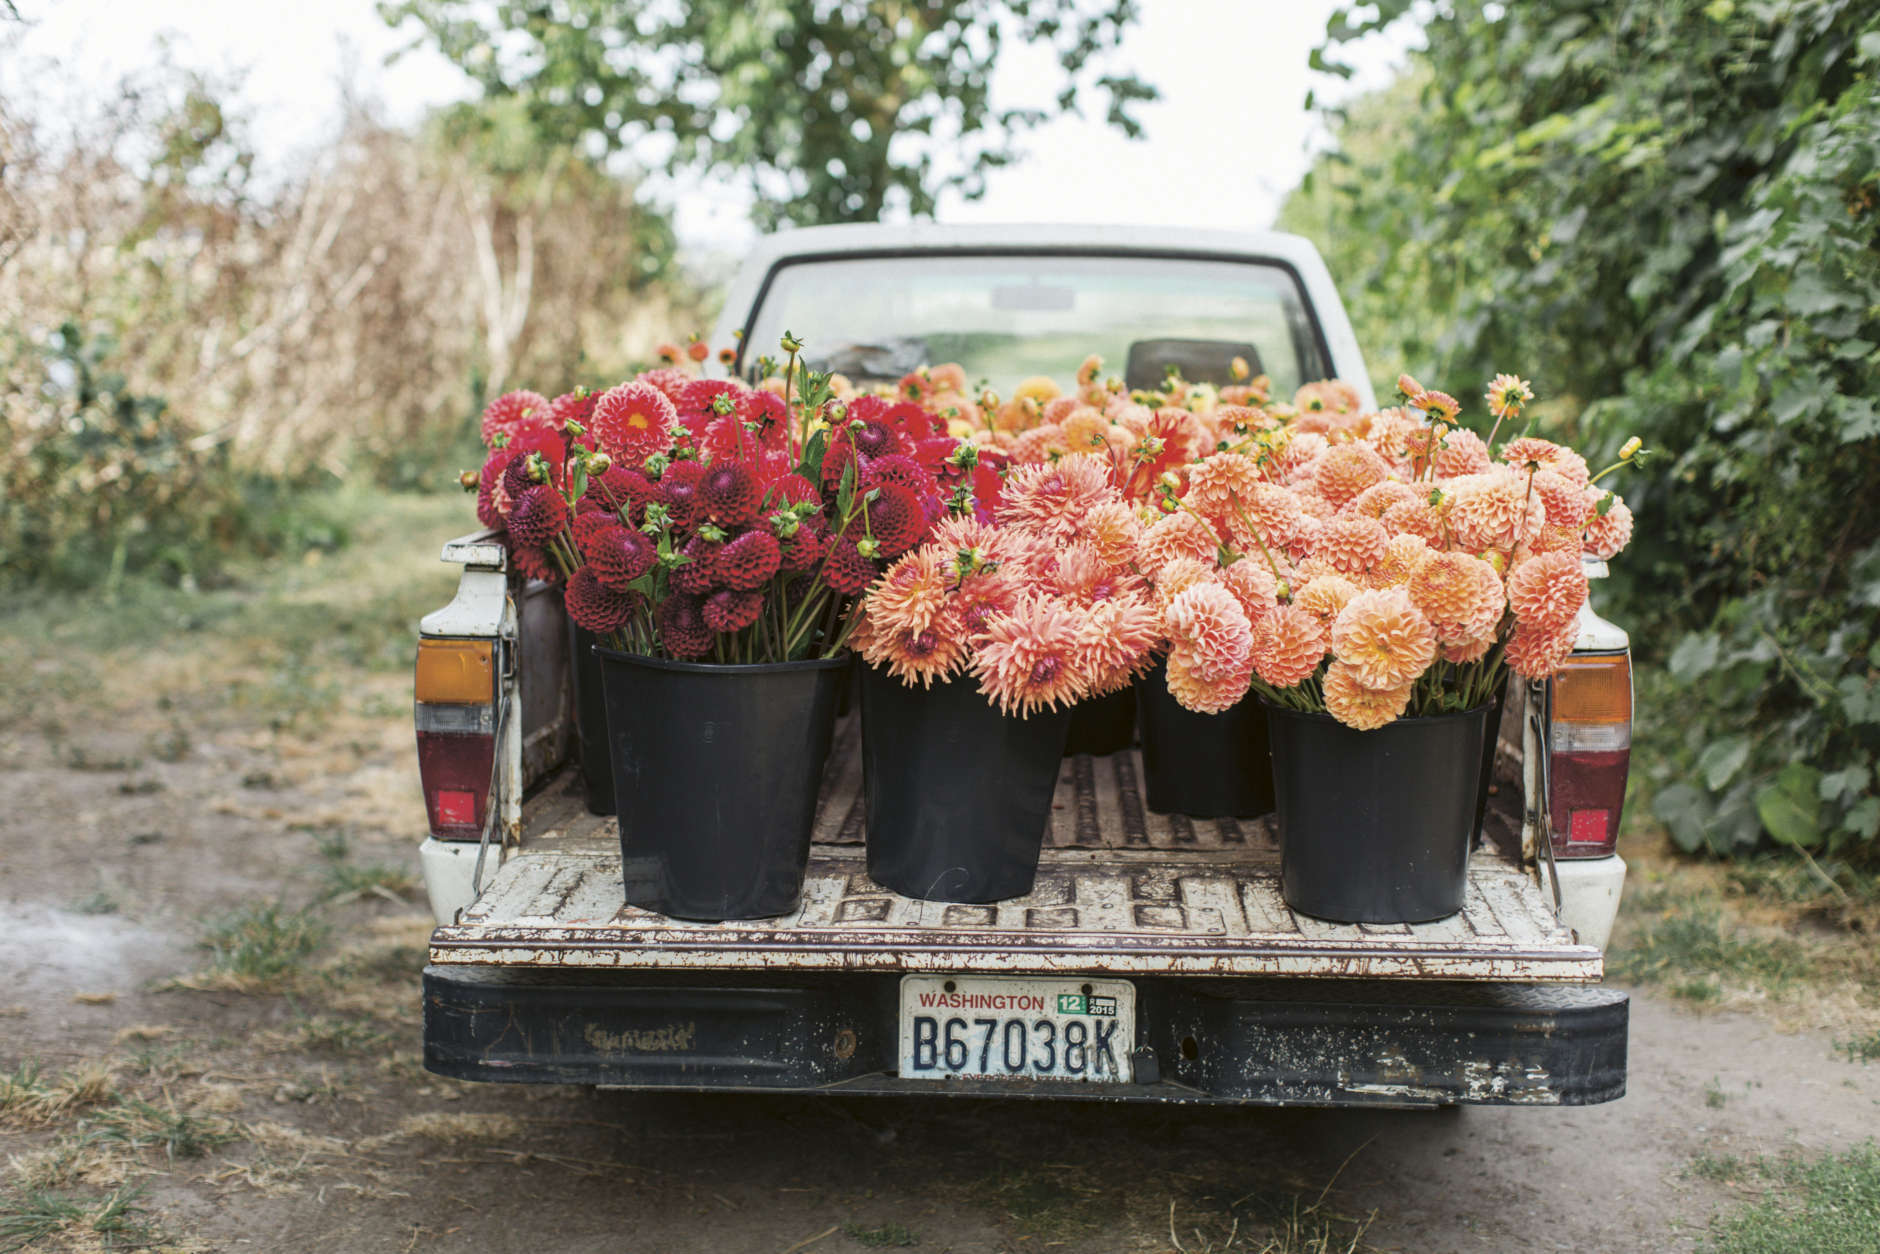 This 2015 photo provided by Chronicle Books shows the farm truck at Erin Benzakein's Floret Farms loaded with a harvest of dahlias from the Floret field in Mount Vernon, Wash. The photo is featured in Benzakein's book, "Floret Farm's Cut Flower Garden." (Michele M. Waite/Chronicle Books via AP)